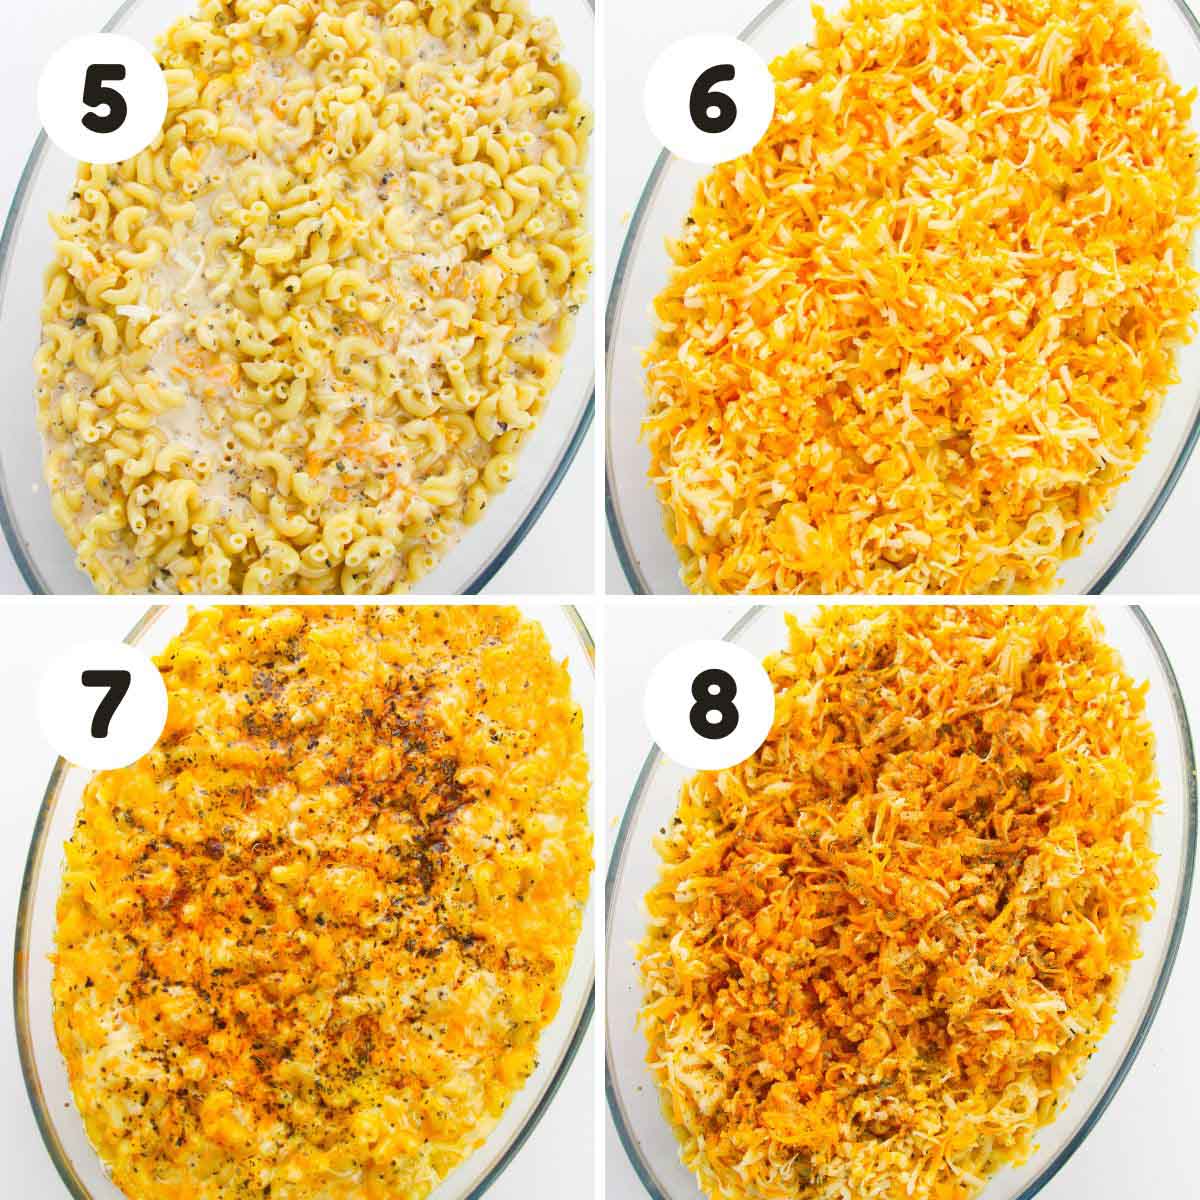 Steps to bake the macaroni and cheese.